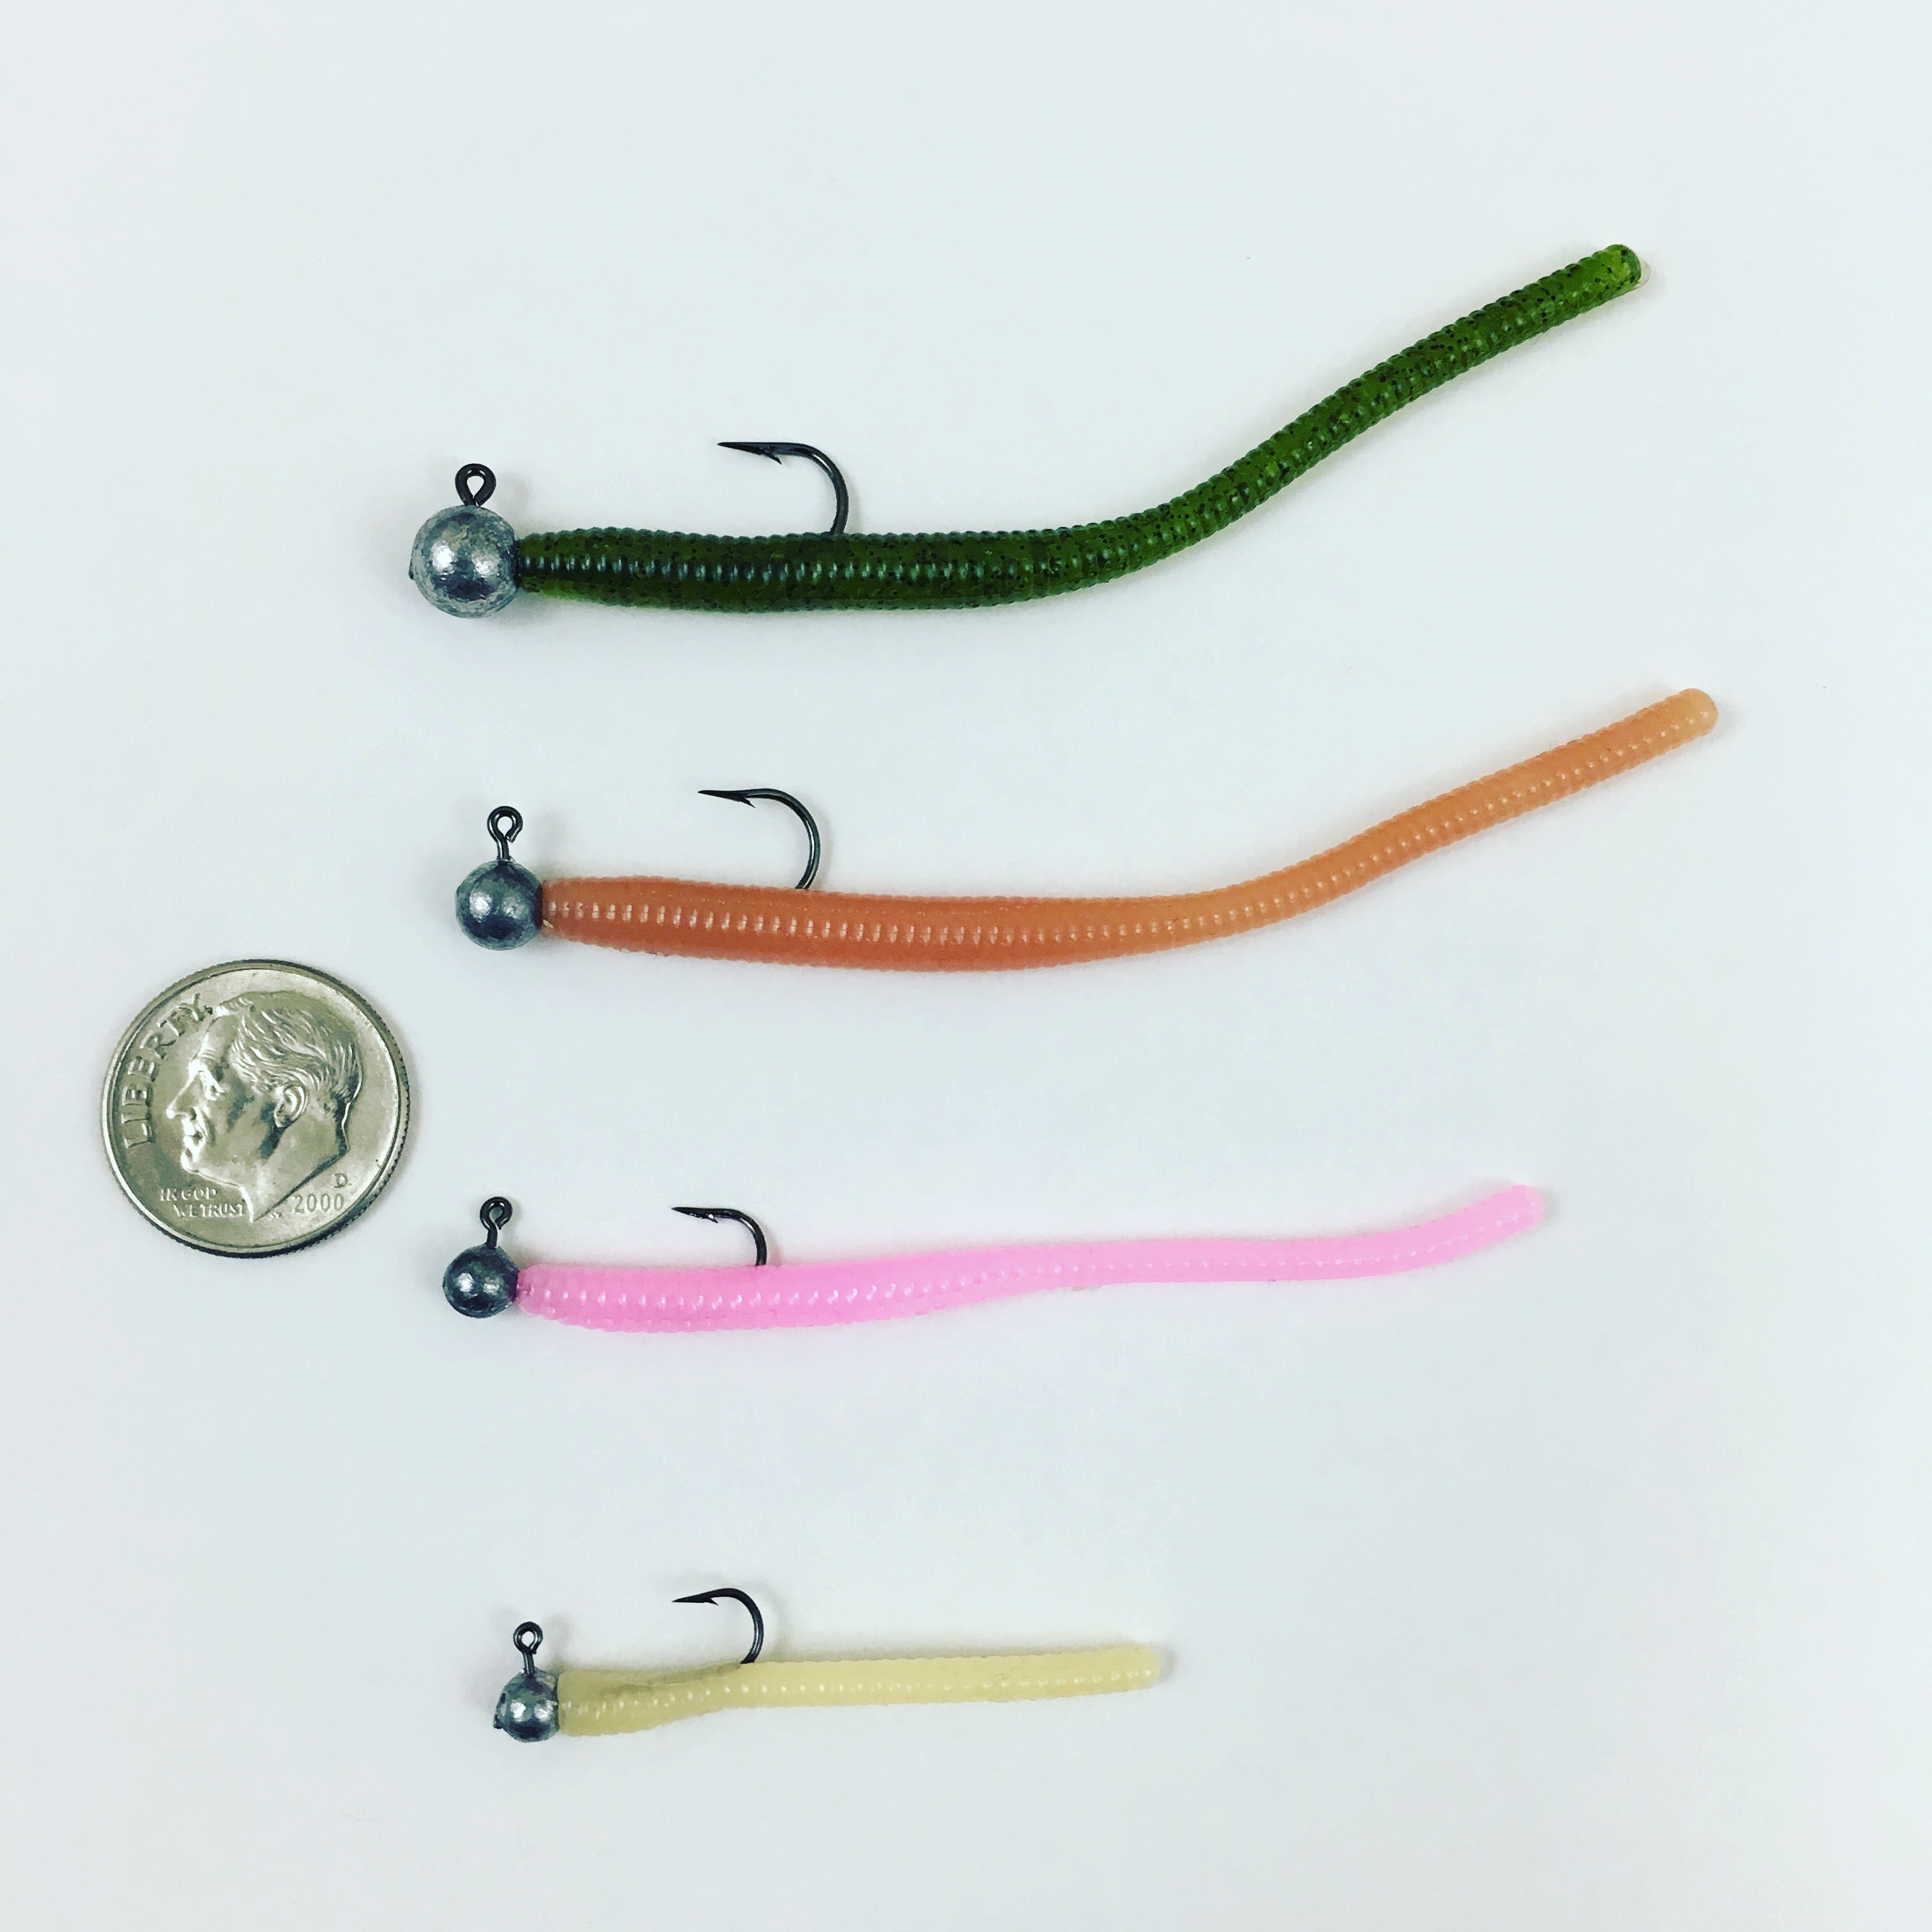 Trout Worms: Summer Craw